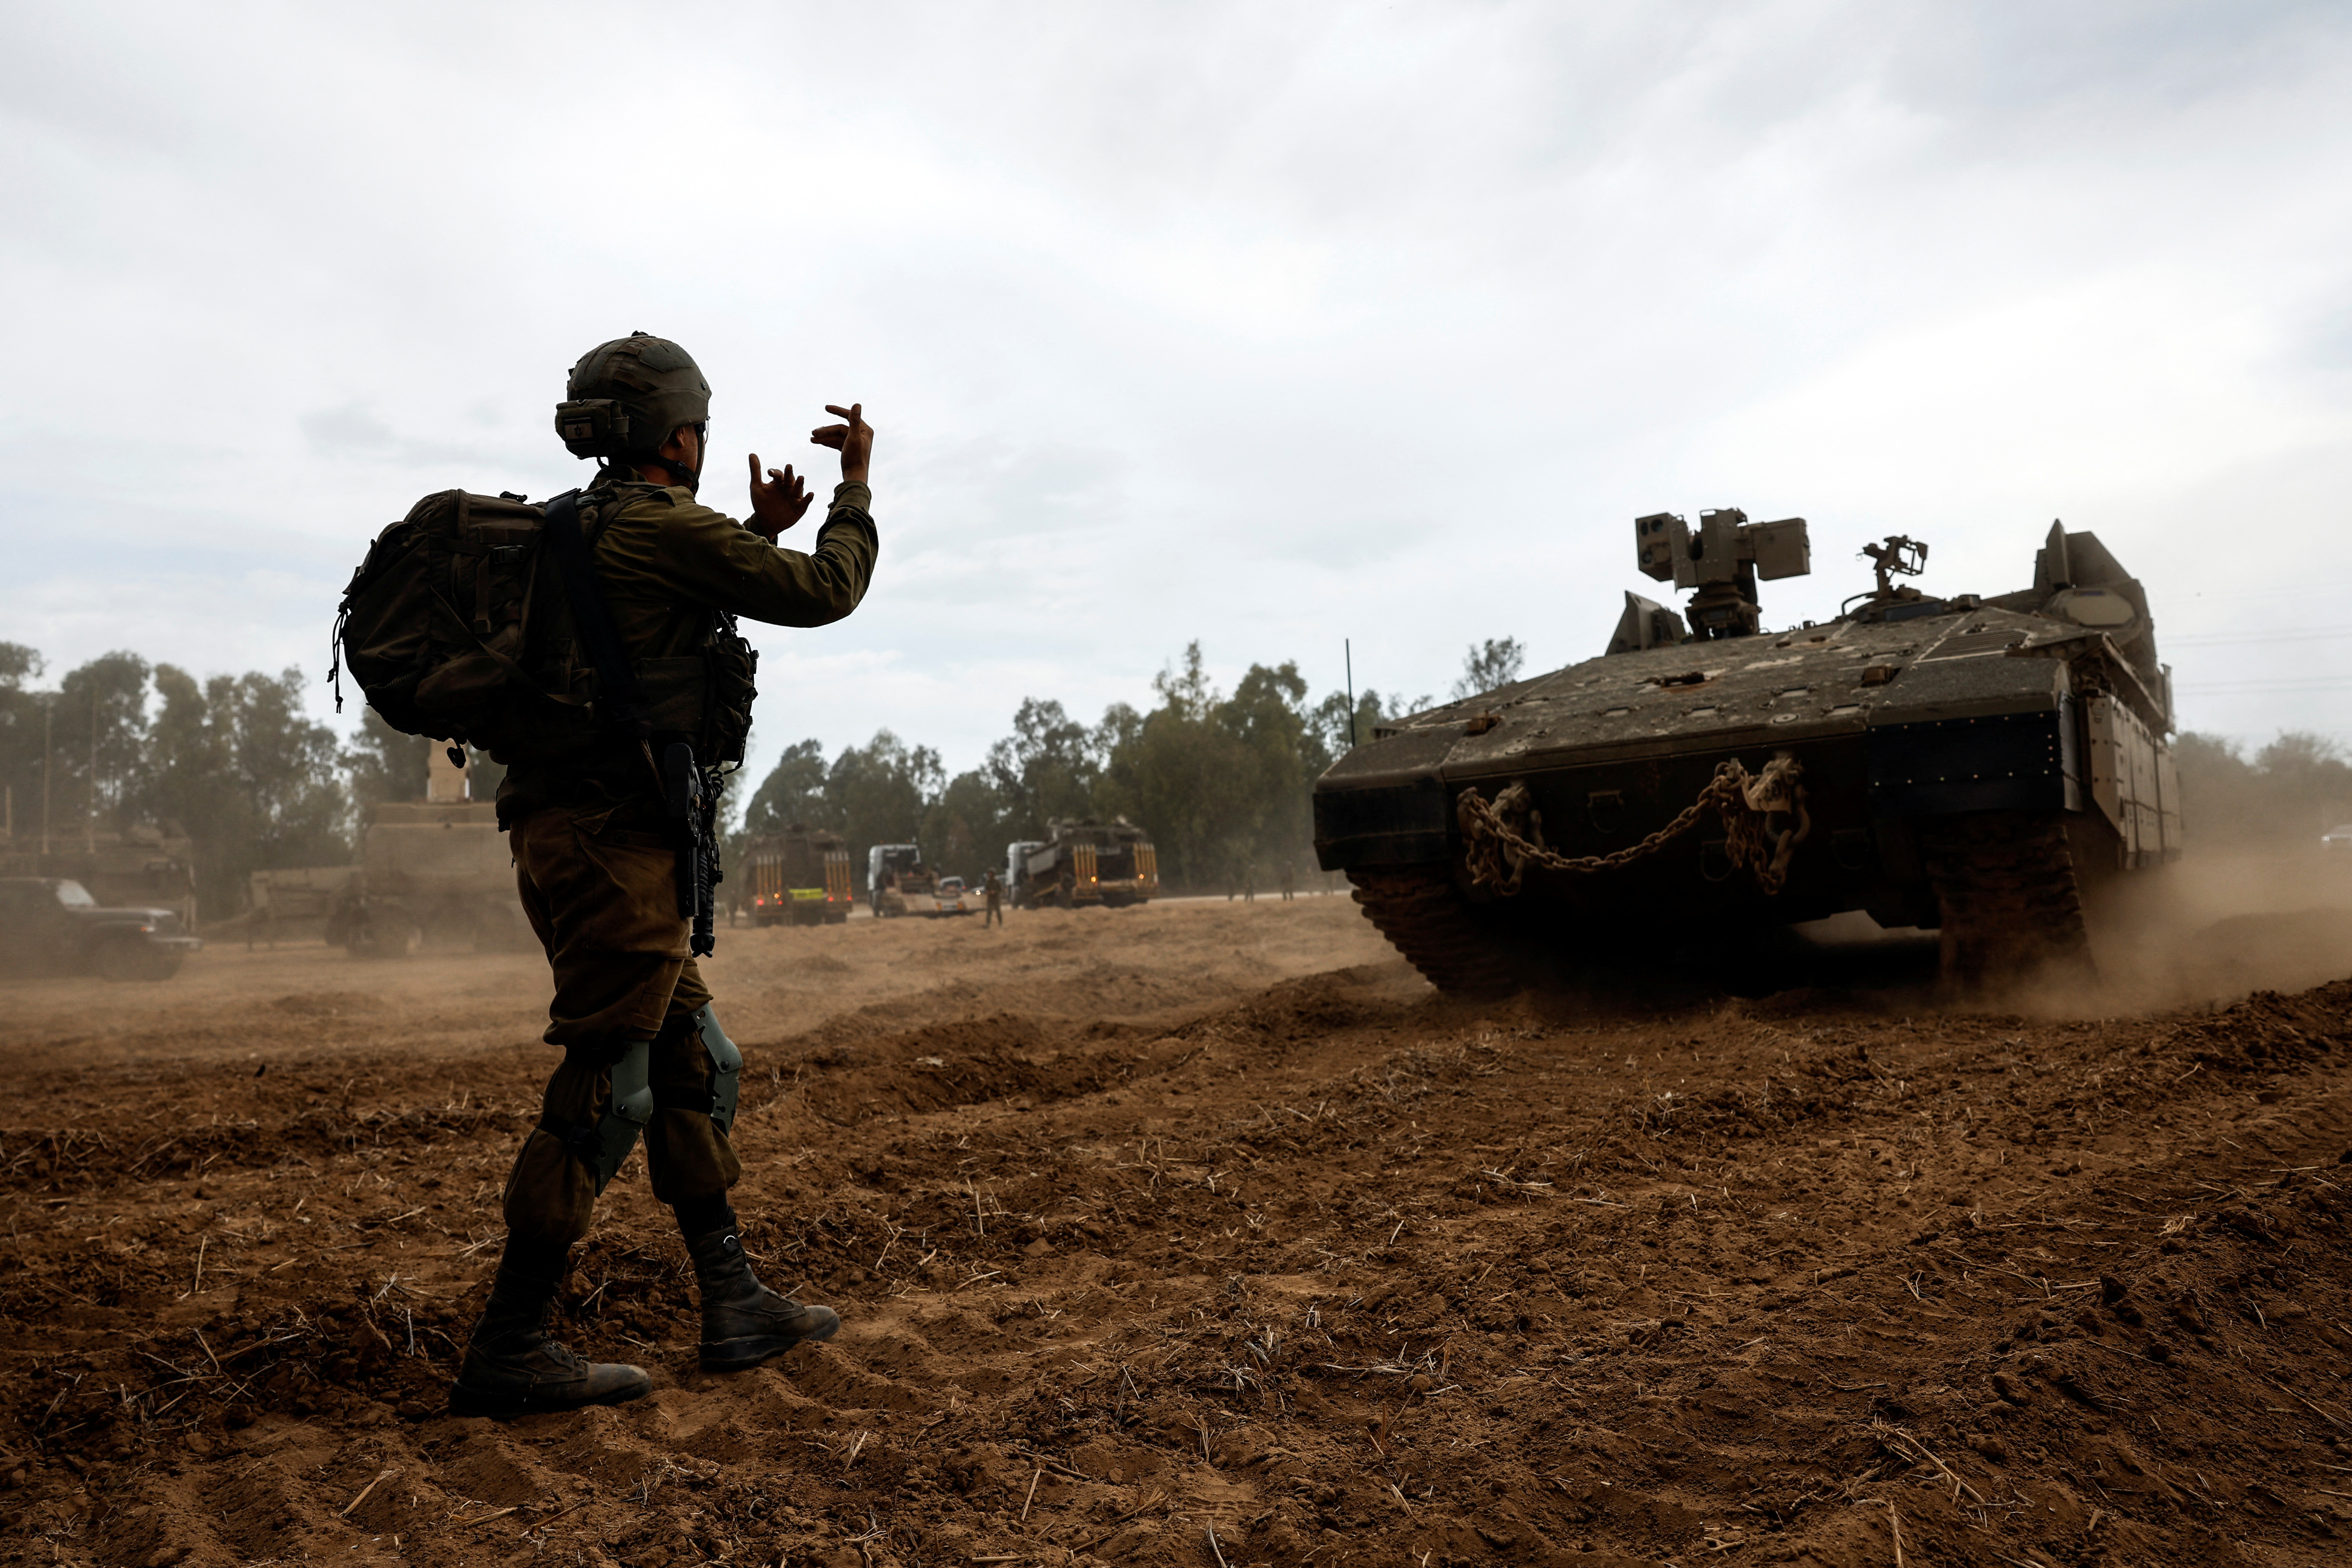 An Israeli soldier directs an Armoured Personnel Carrier (APC) at the Israeli side of the Gaza border, as violence around the nearby Gaza Strip mounts following a mass-rampage by armed Palestinian infiltrators